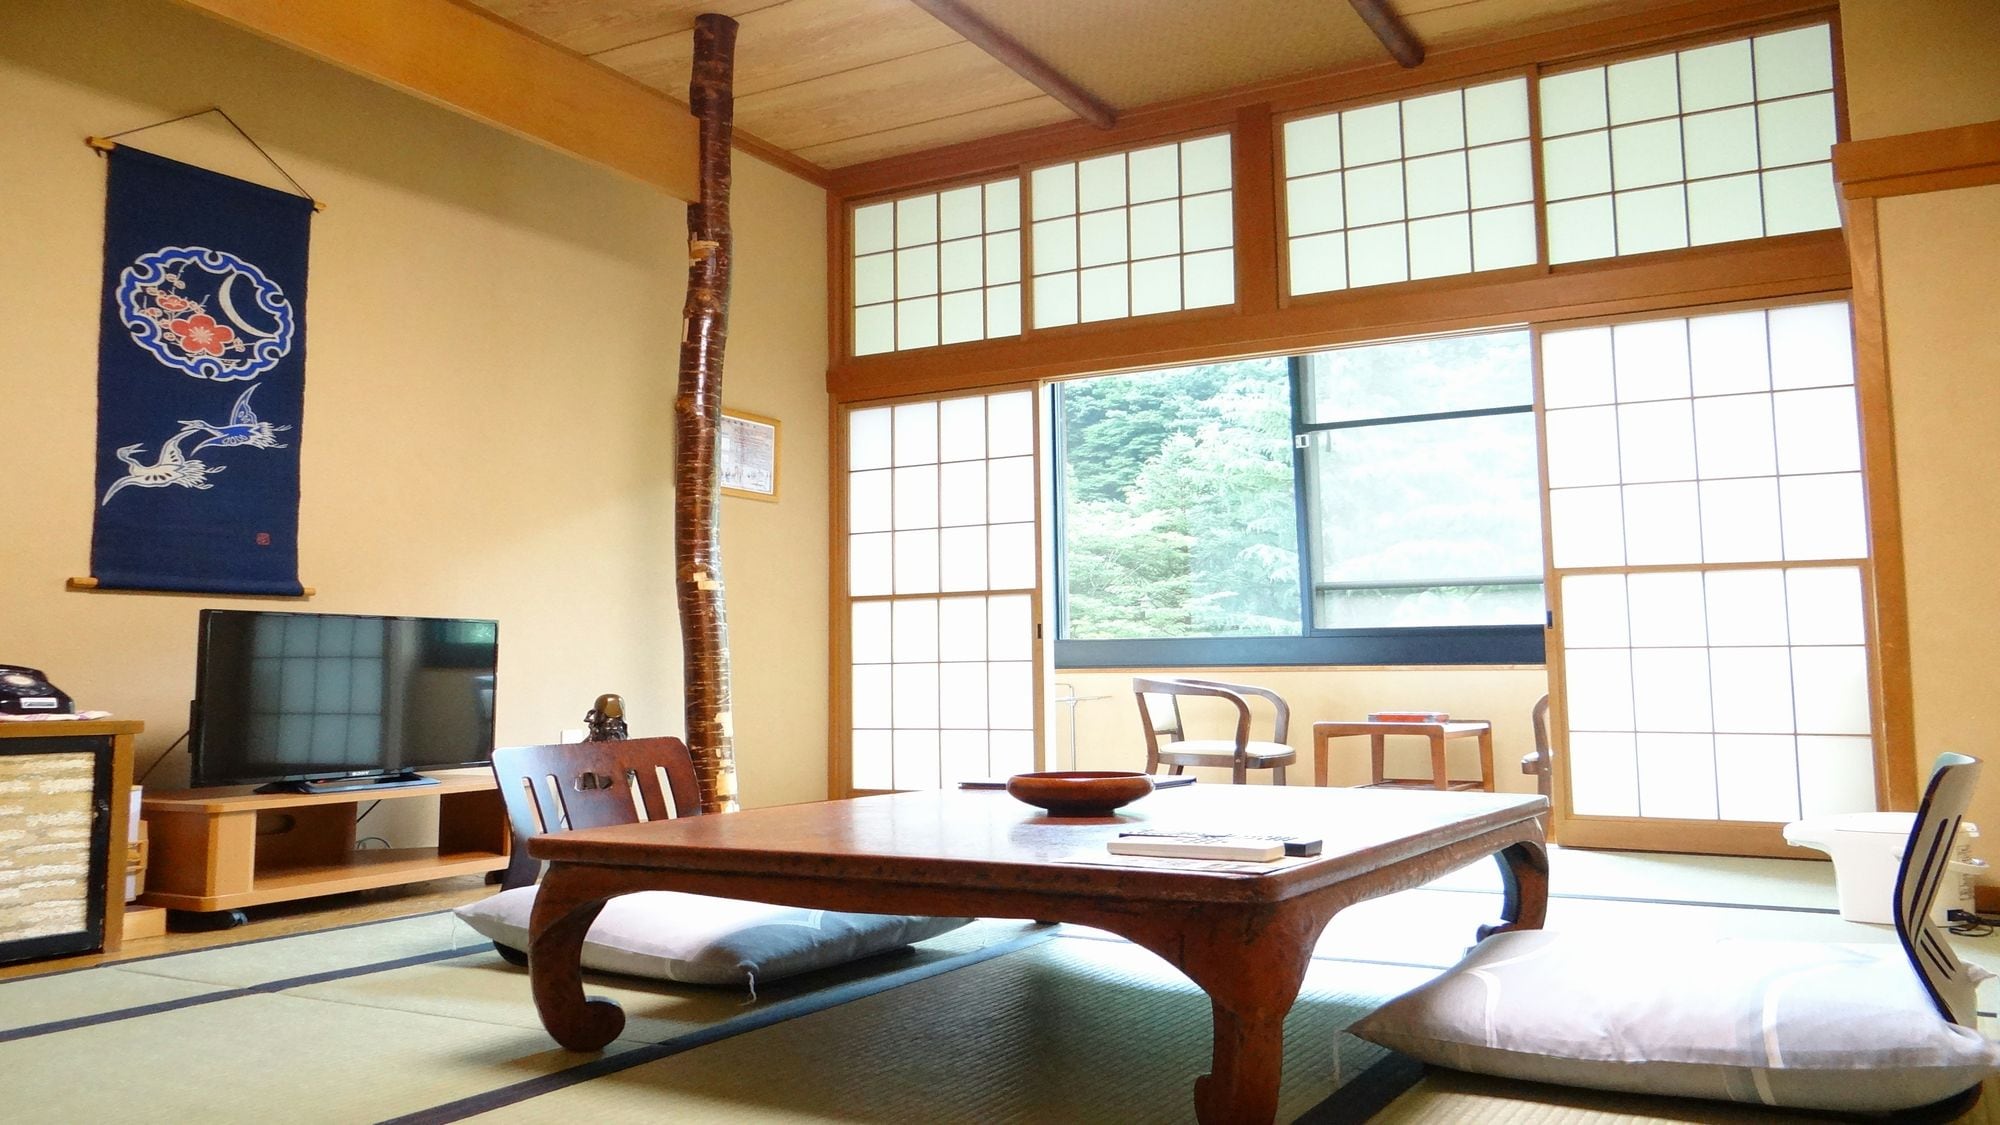 An example of a 7 tatami mat room in the East Building (Treasure River side)